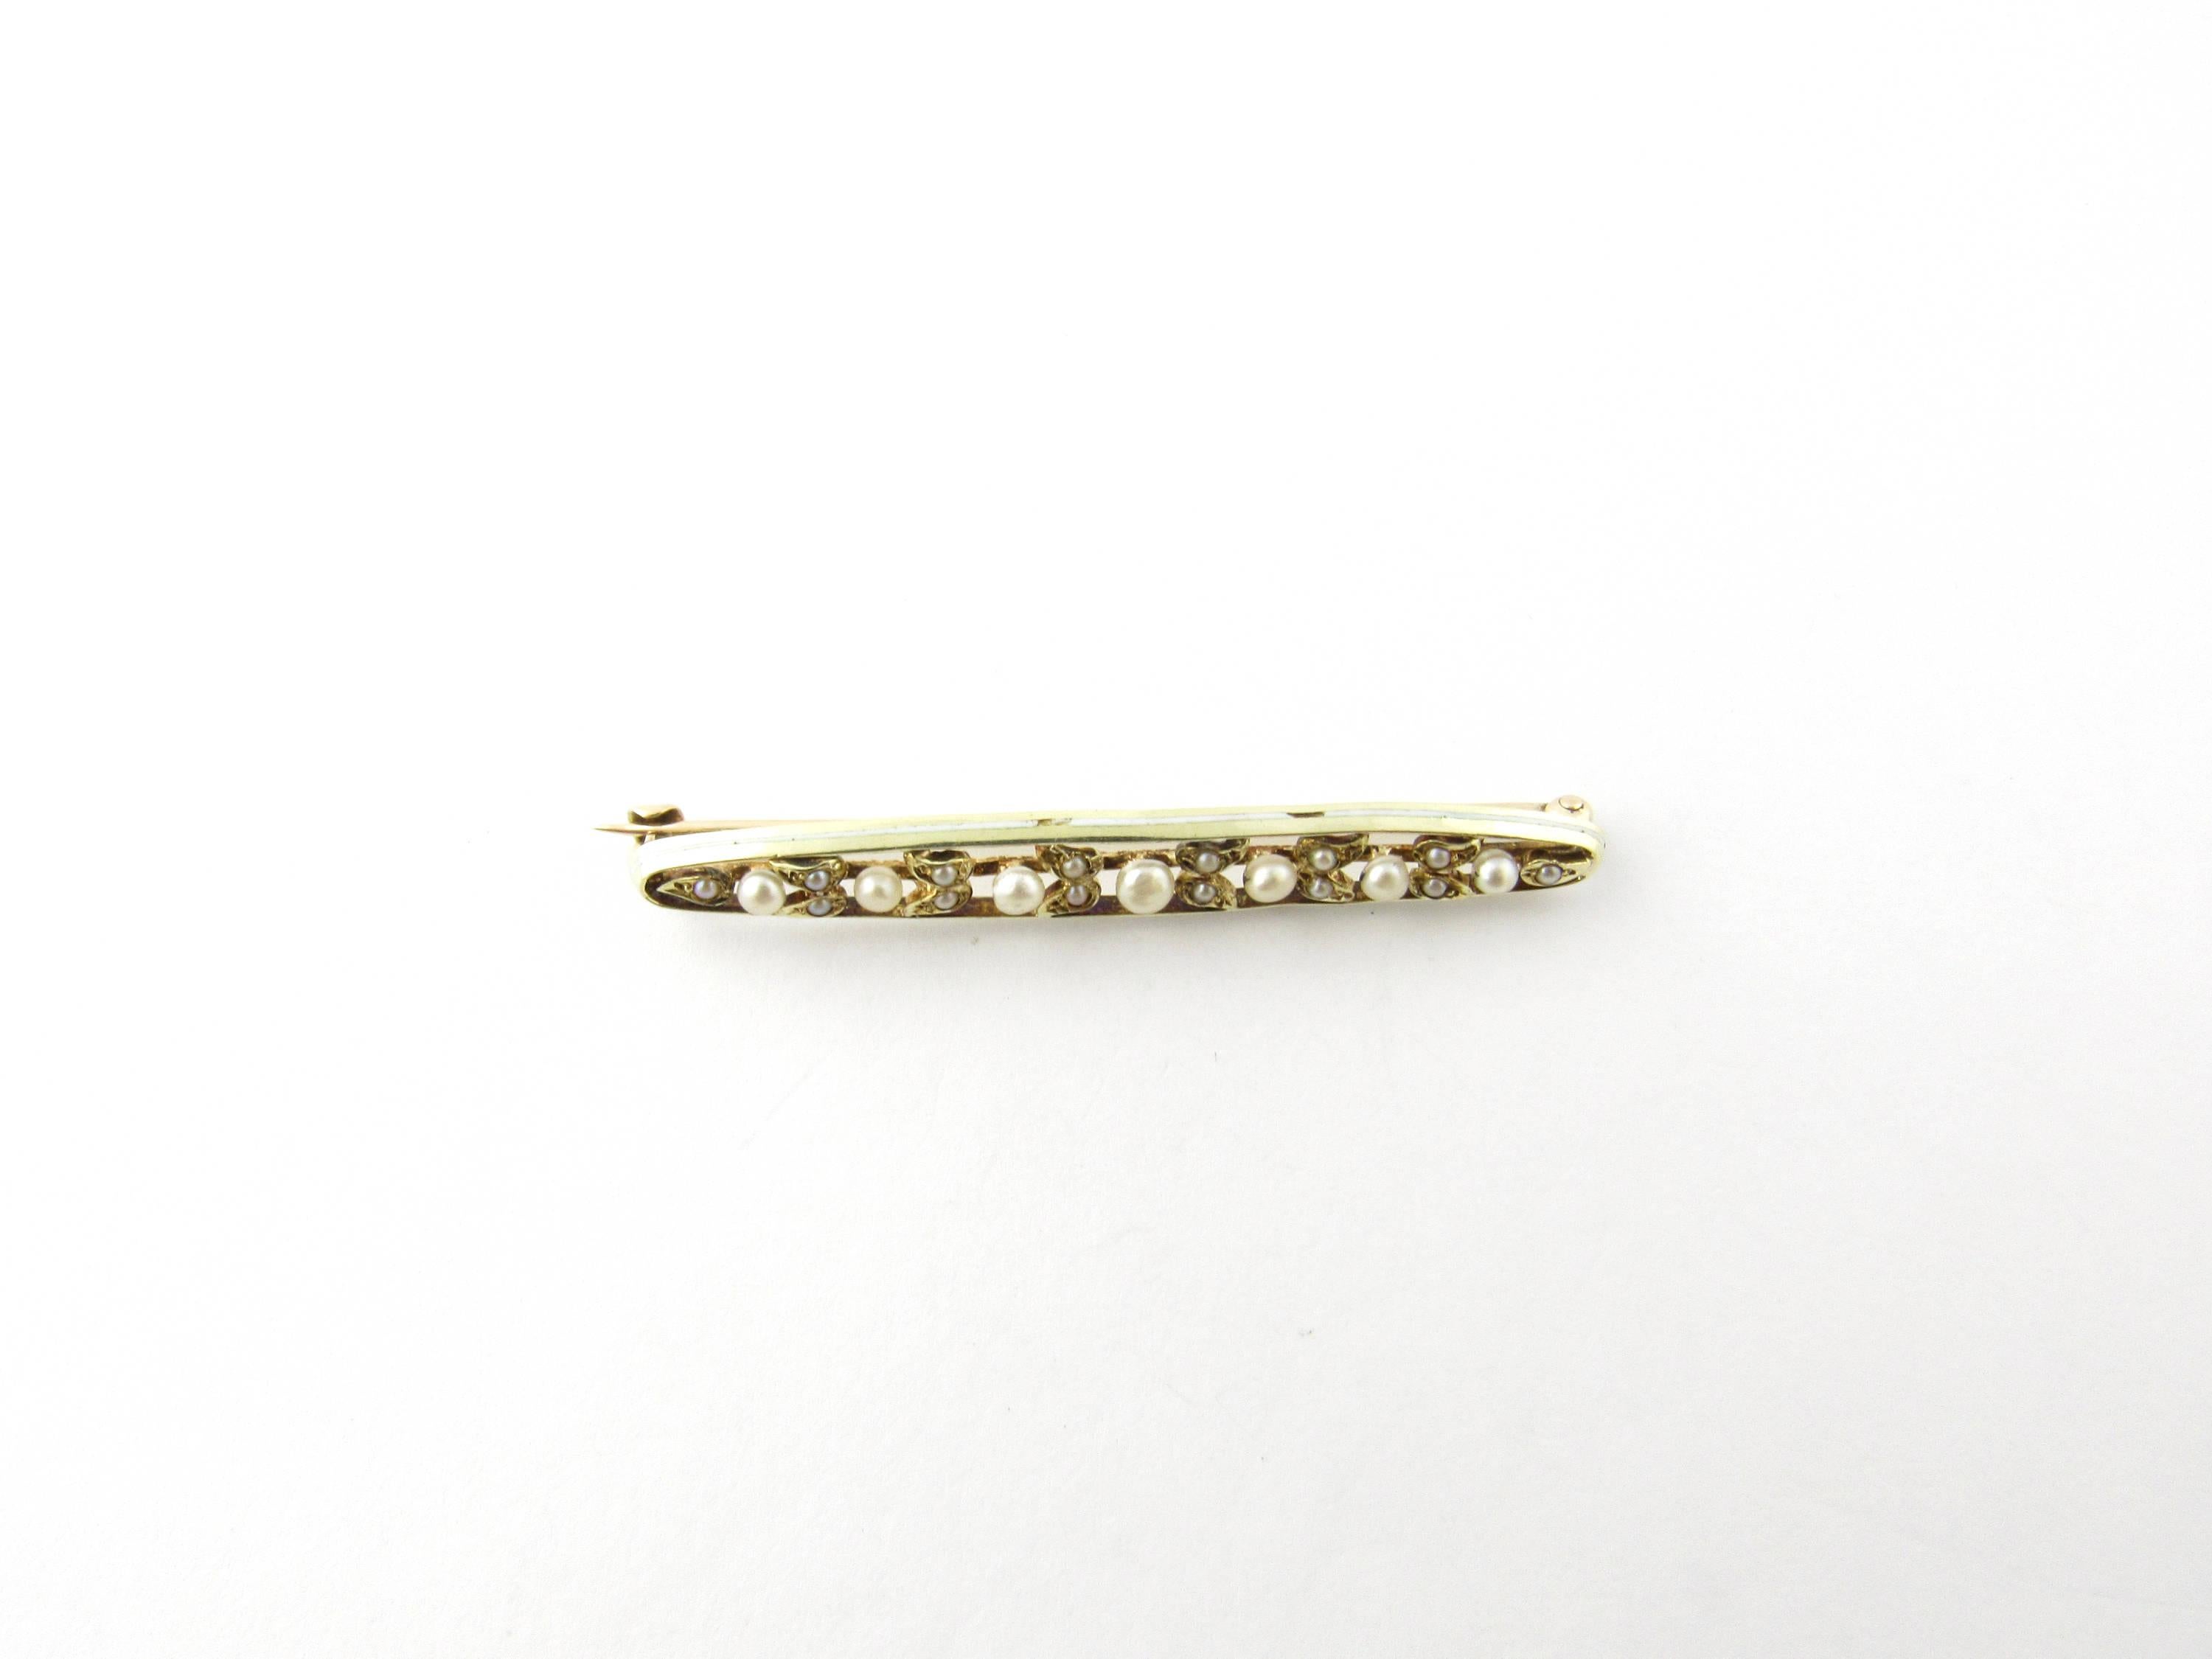 Vintage 14 Karat Yellow Gold and Pearl Brooch-

This elegant brooch is detailed with delicate seed pearls in beautifully designed 14K yellow gold.

Size:  48 mm x  7 mm

Weight:  2.2 dwt. /  3.5 gr.

Hallmark: 14K

Very good condition,